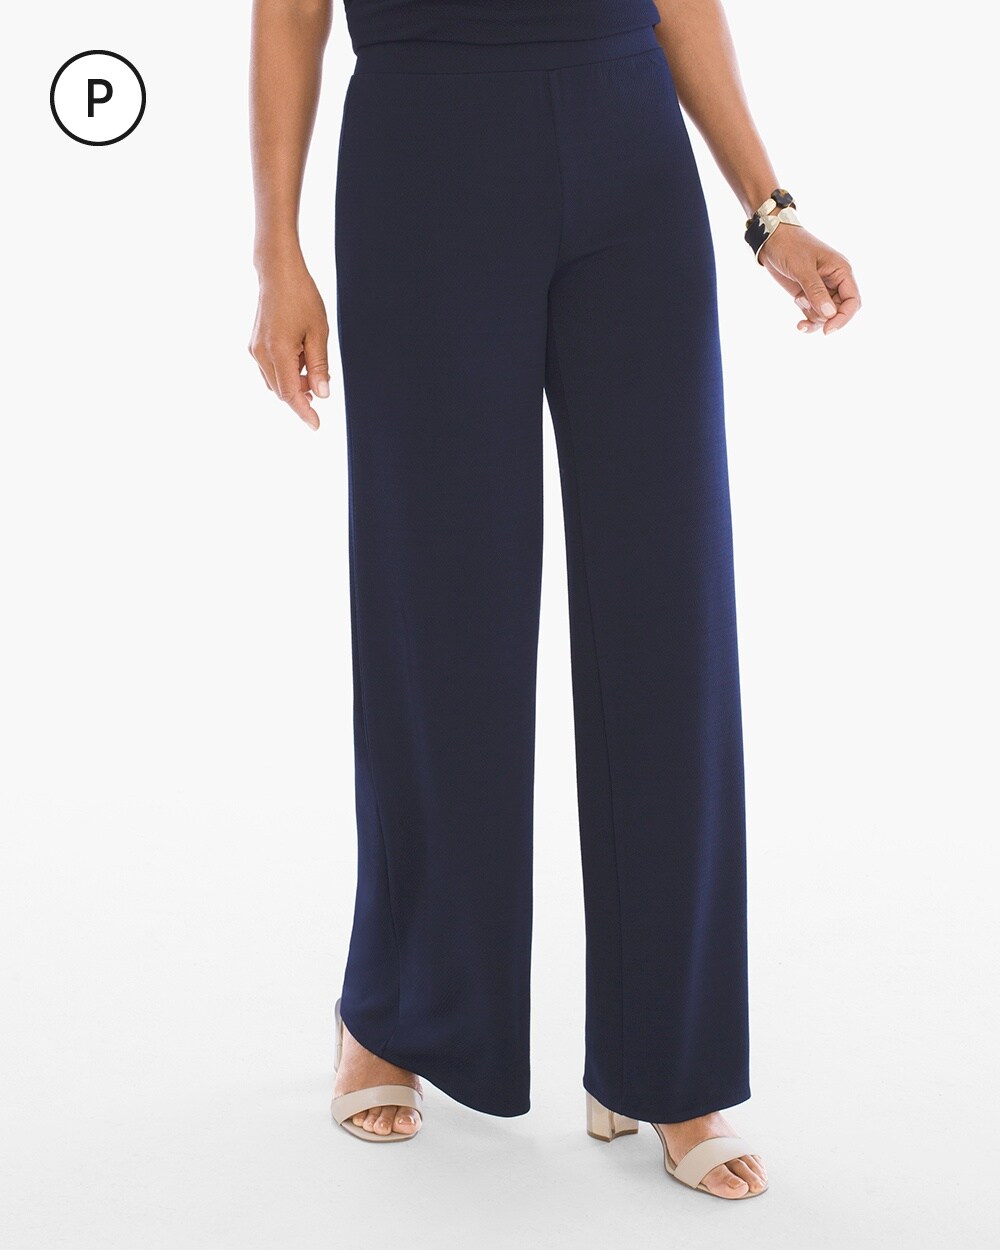 Travelers Collection Petite Textured Wide-Leg Pants